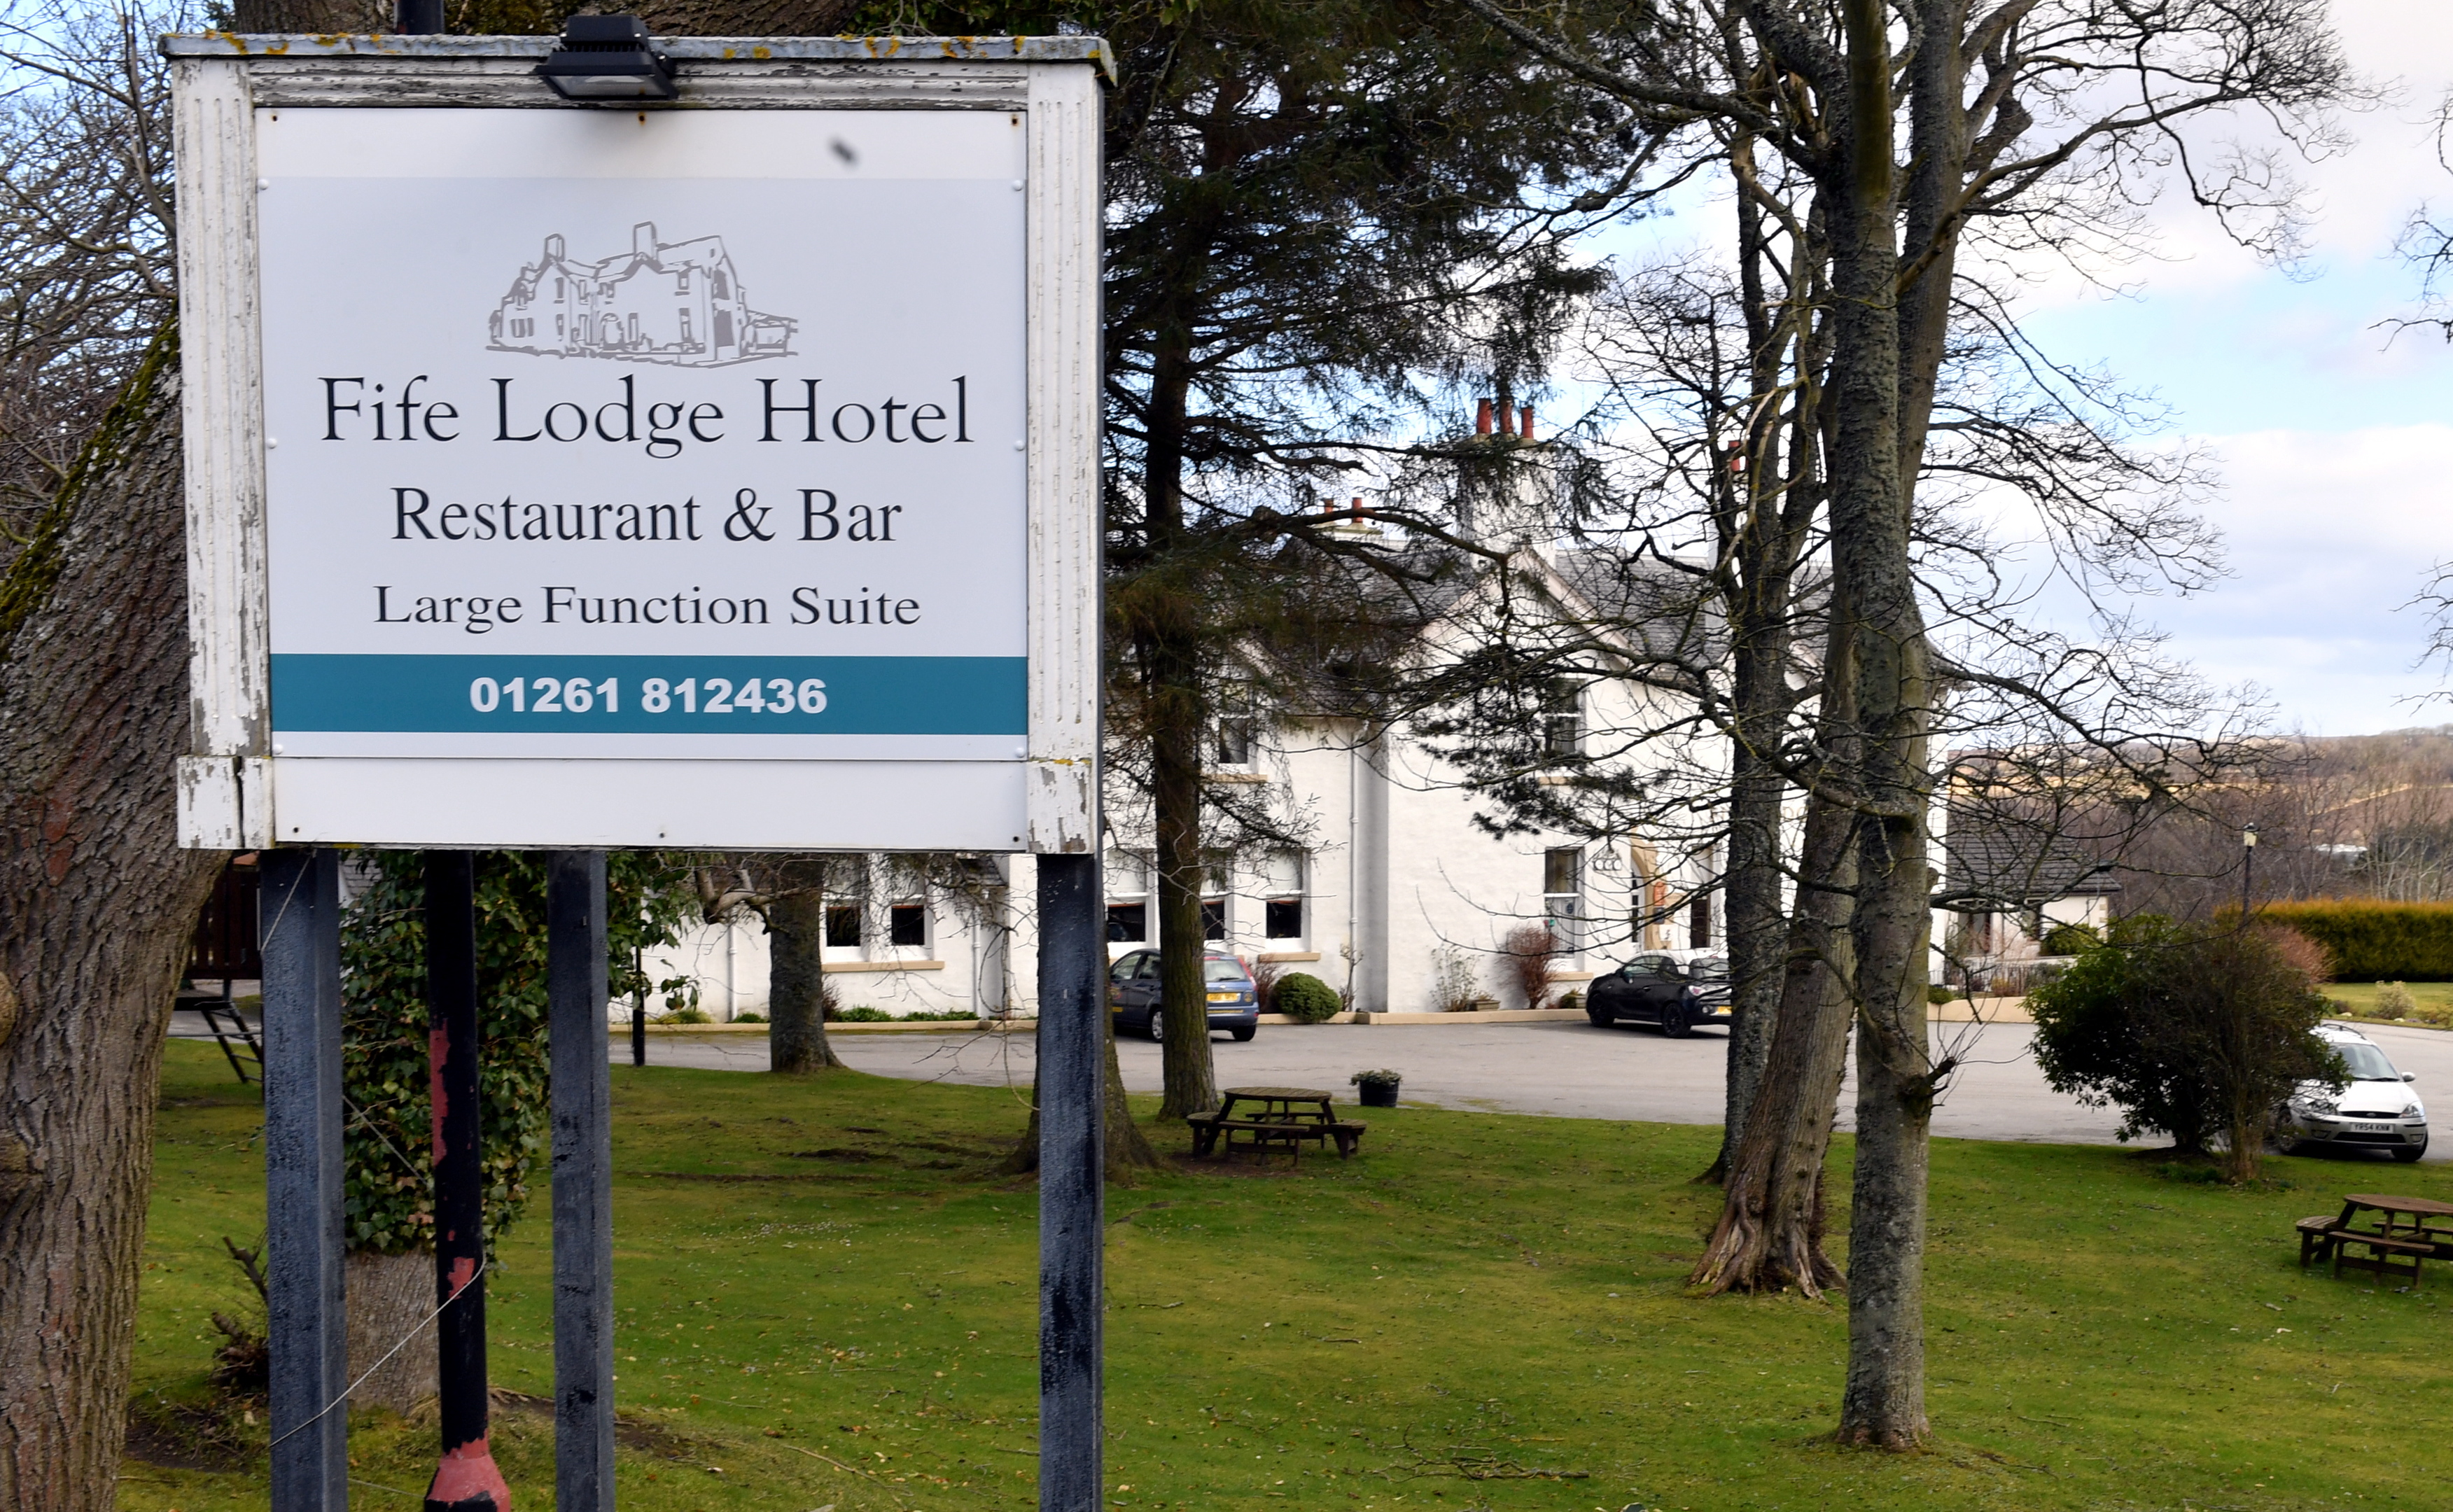 The Fife Lodge Hotel in Banff is for sale at £595,000